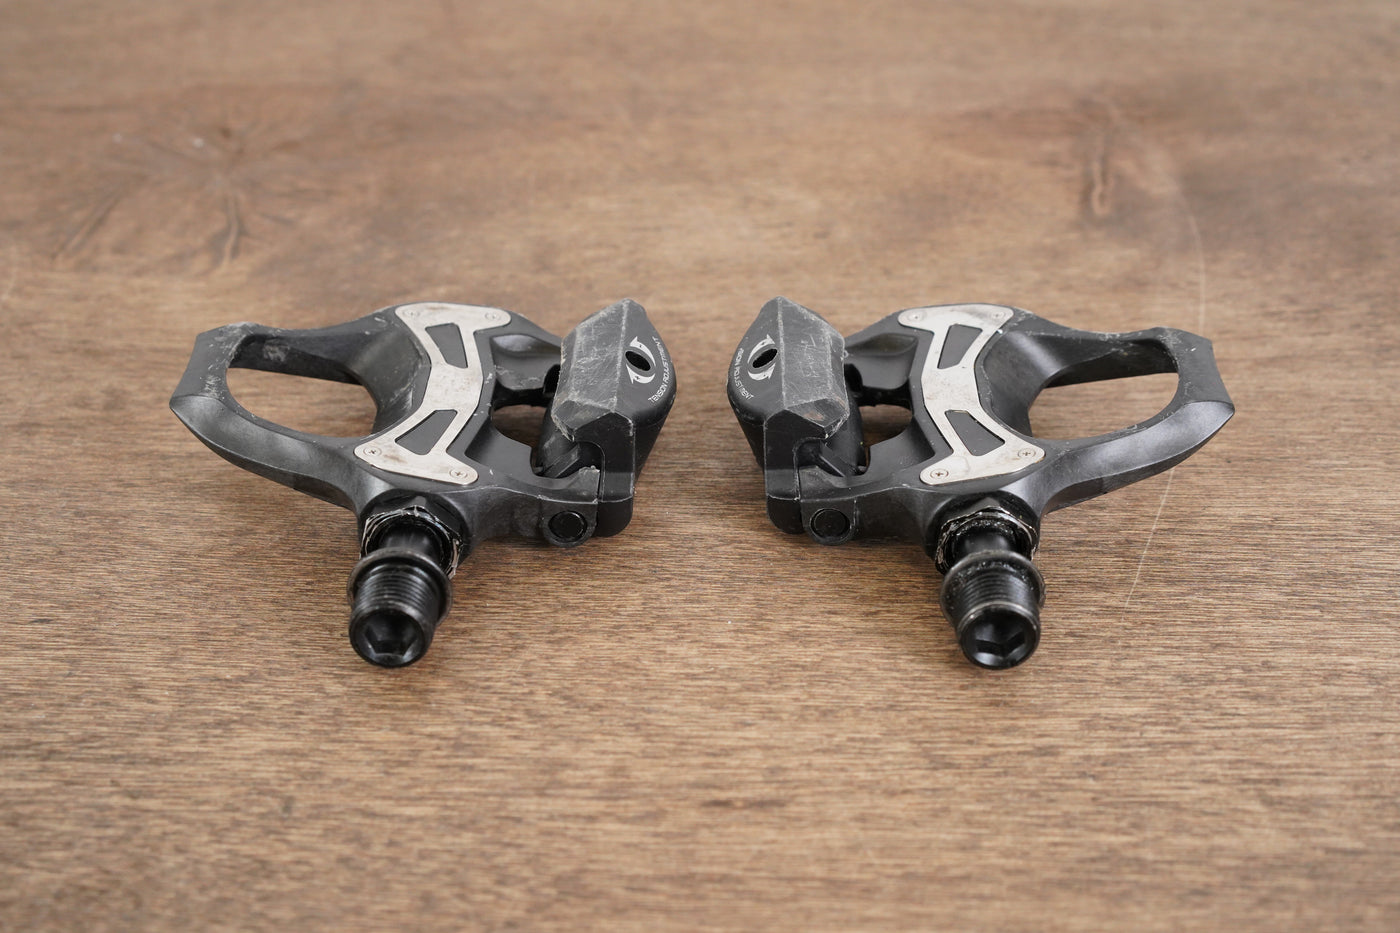 Shimano 105 PD-5800 SPD-SL Carbon Clipless Road Pedals 275g